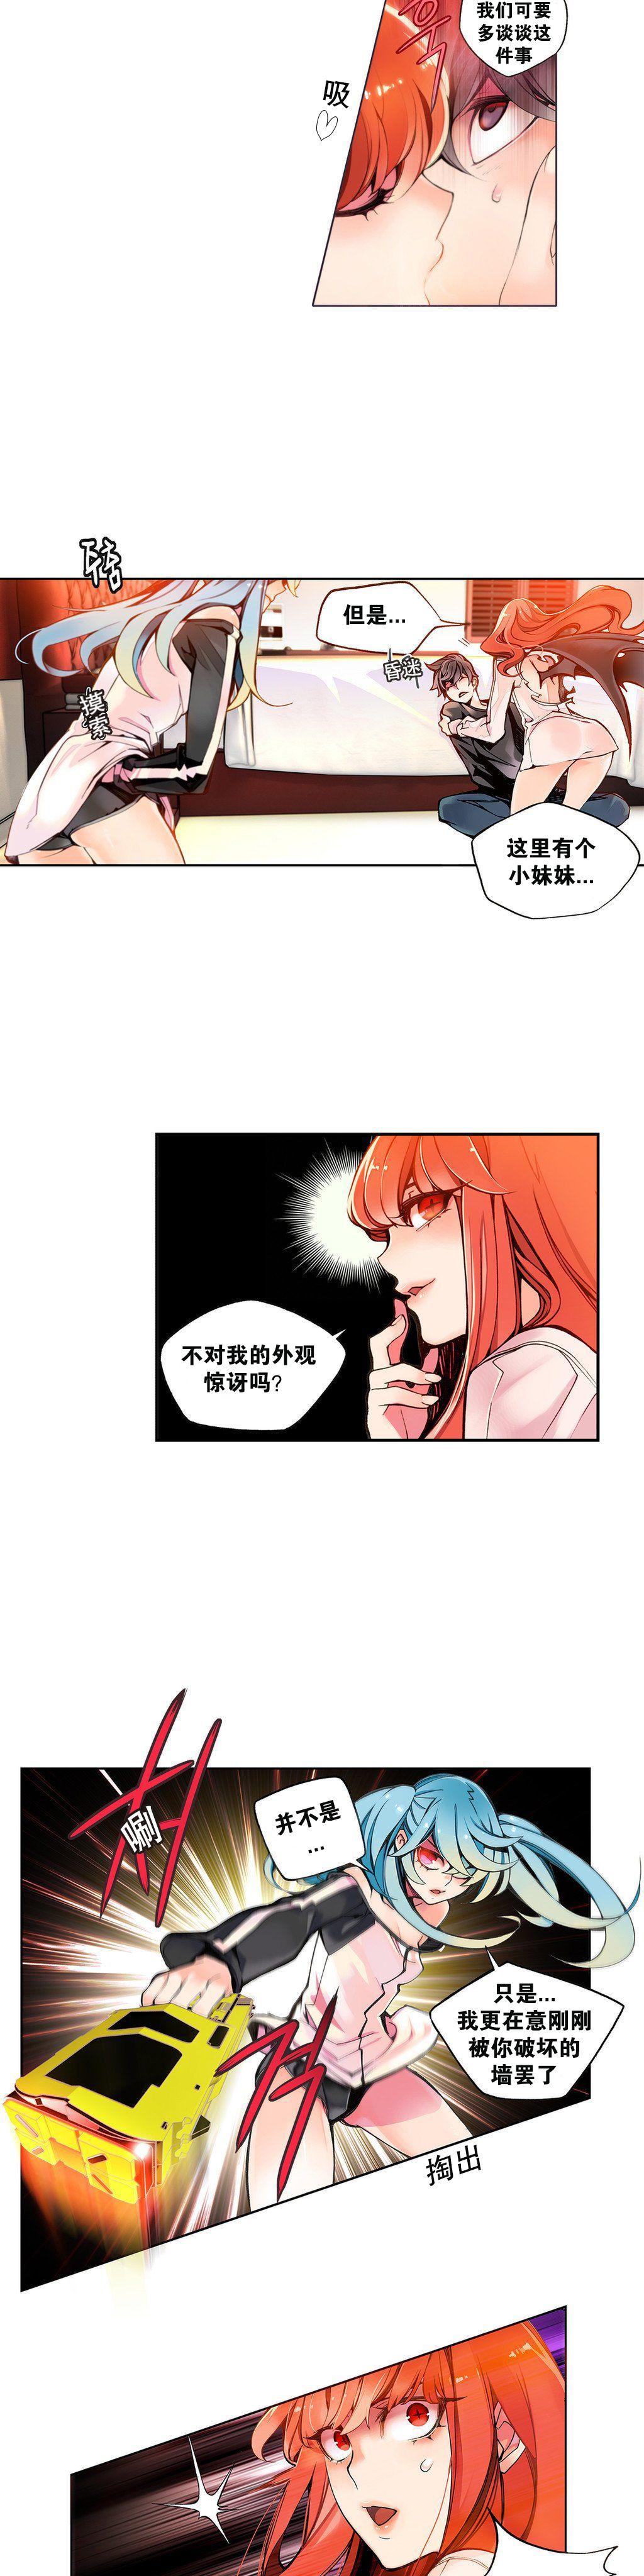 [Juder] 莉莉丝的纽带(Lilith`s Cord) Ch.1-15 [Chinese] 59